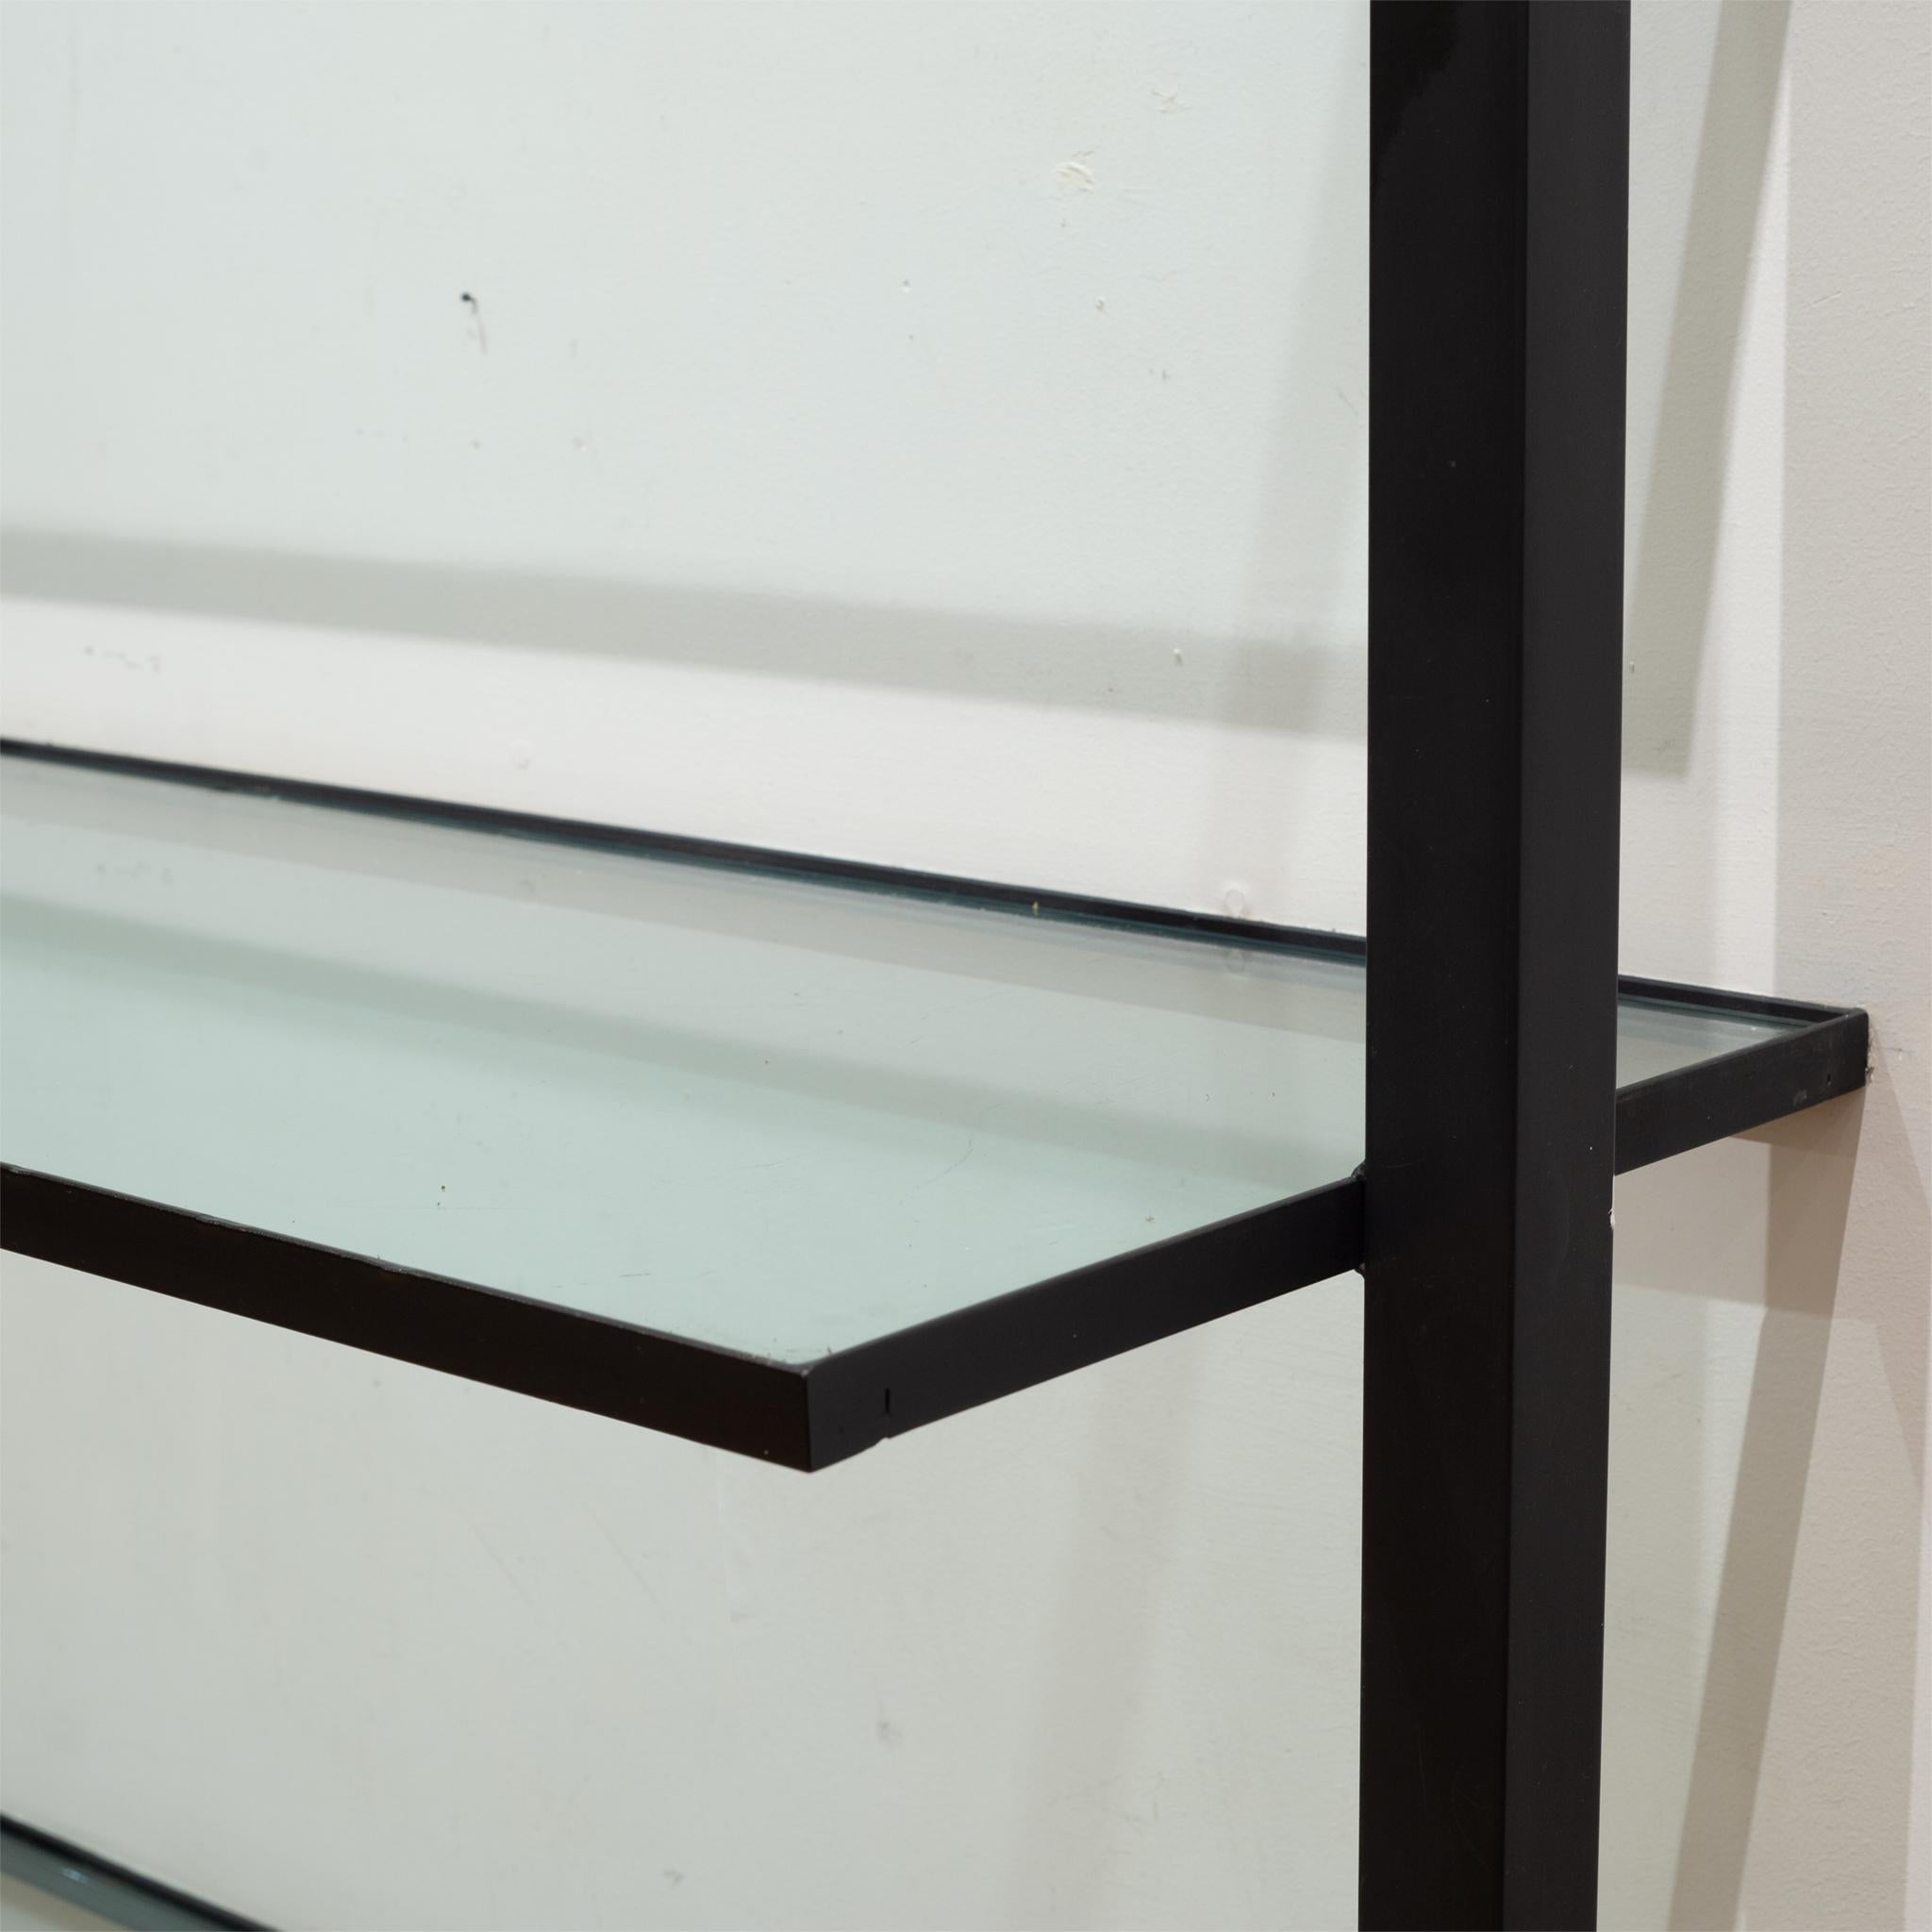 Large Custom Floating Steel and Glass Shelf c. 2014 For Sale 3